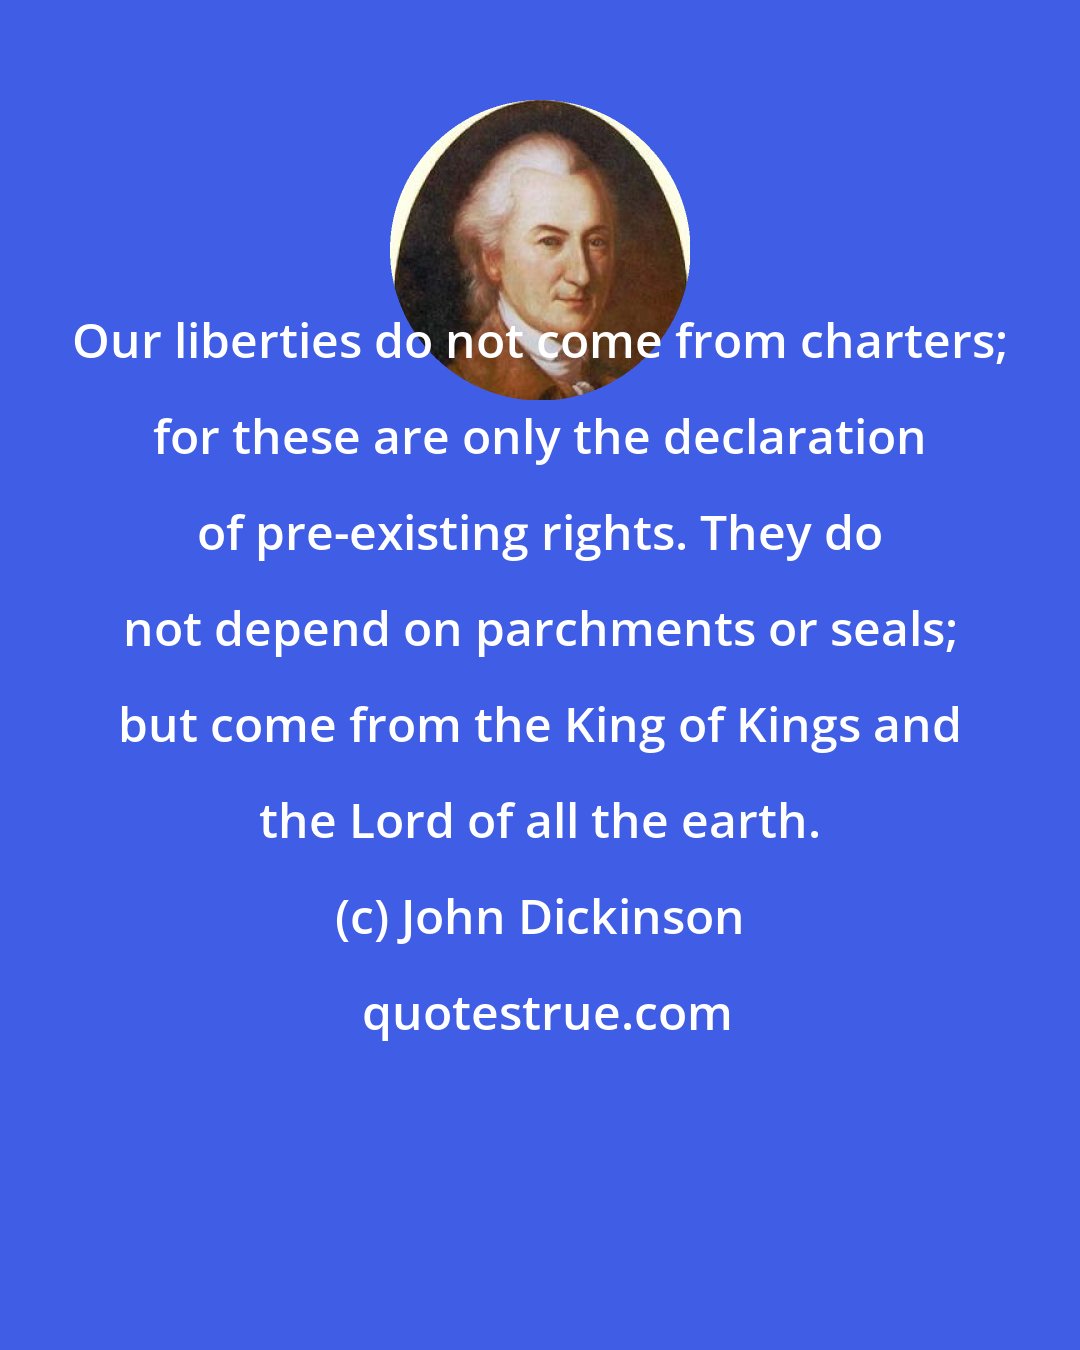 John Dickinson: Our liberties do not come from charters; for these are only the declaration of pre-existing rights. They do not depend on parchments or seals; but come from the King of Kings and the Lord of all the earth.